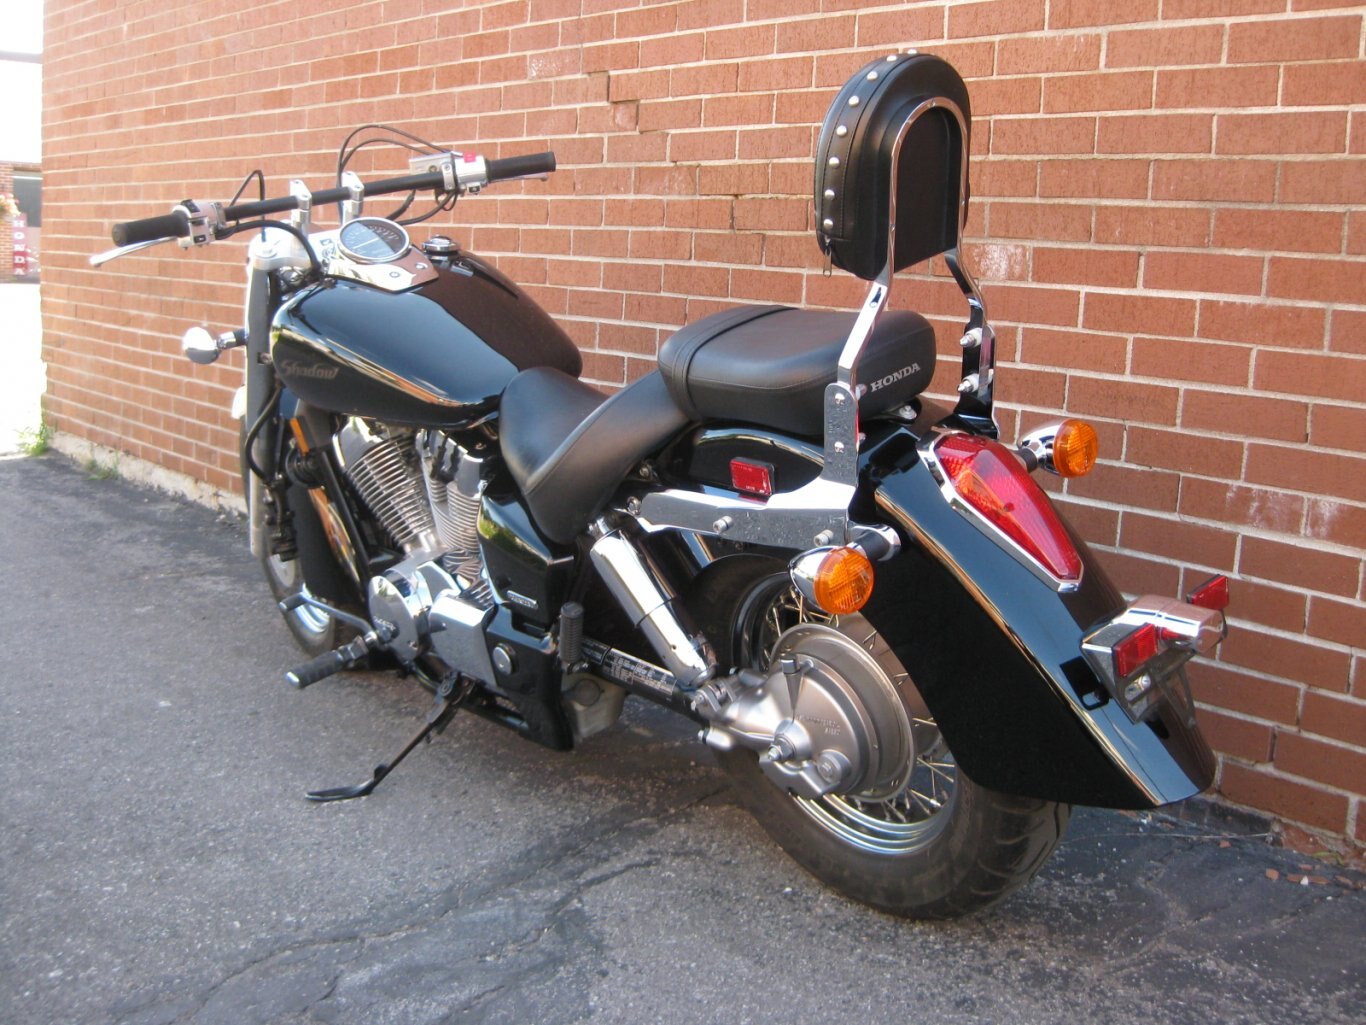 2005 Honda Shadow Aero (VT750) SOLD CONGRATULATIONS MOTORCYCLE T WELCOME TO THE WORLD OF TWO WHEELED EXCITEMENT!